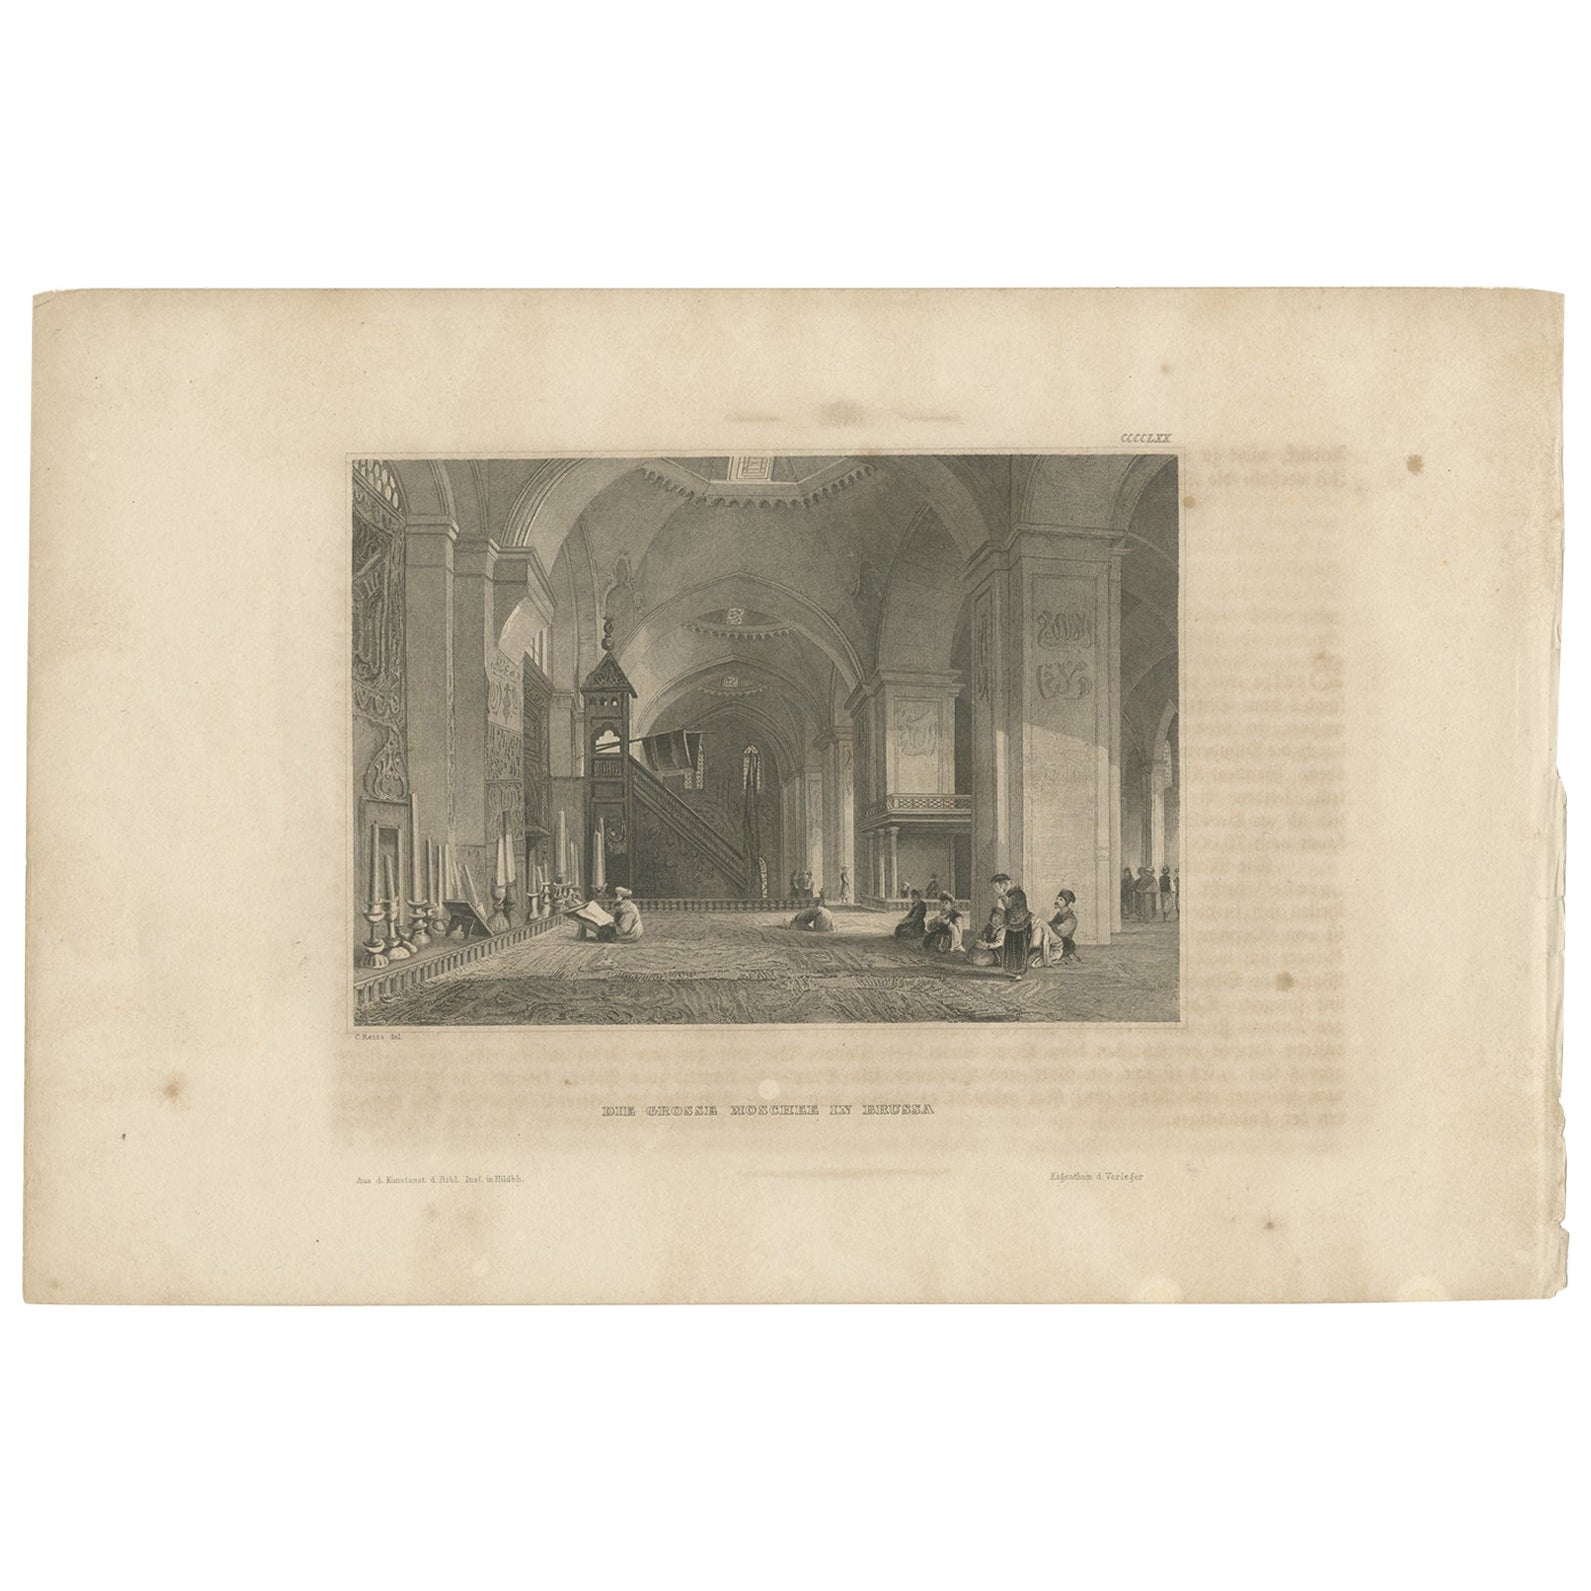 Antique Print of the Great Mosque at Brussa in Turkey, 1843